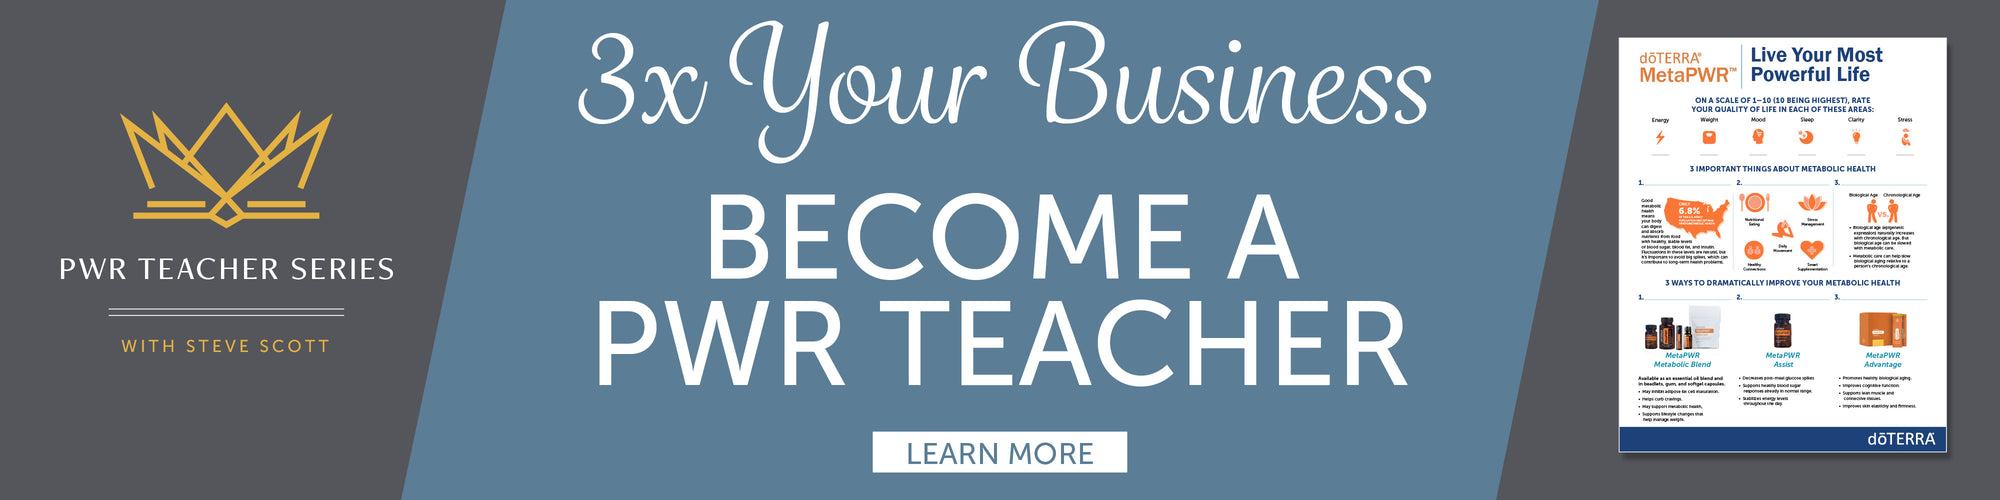 Triple Your Business with the PWR Teaching Series